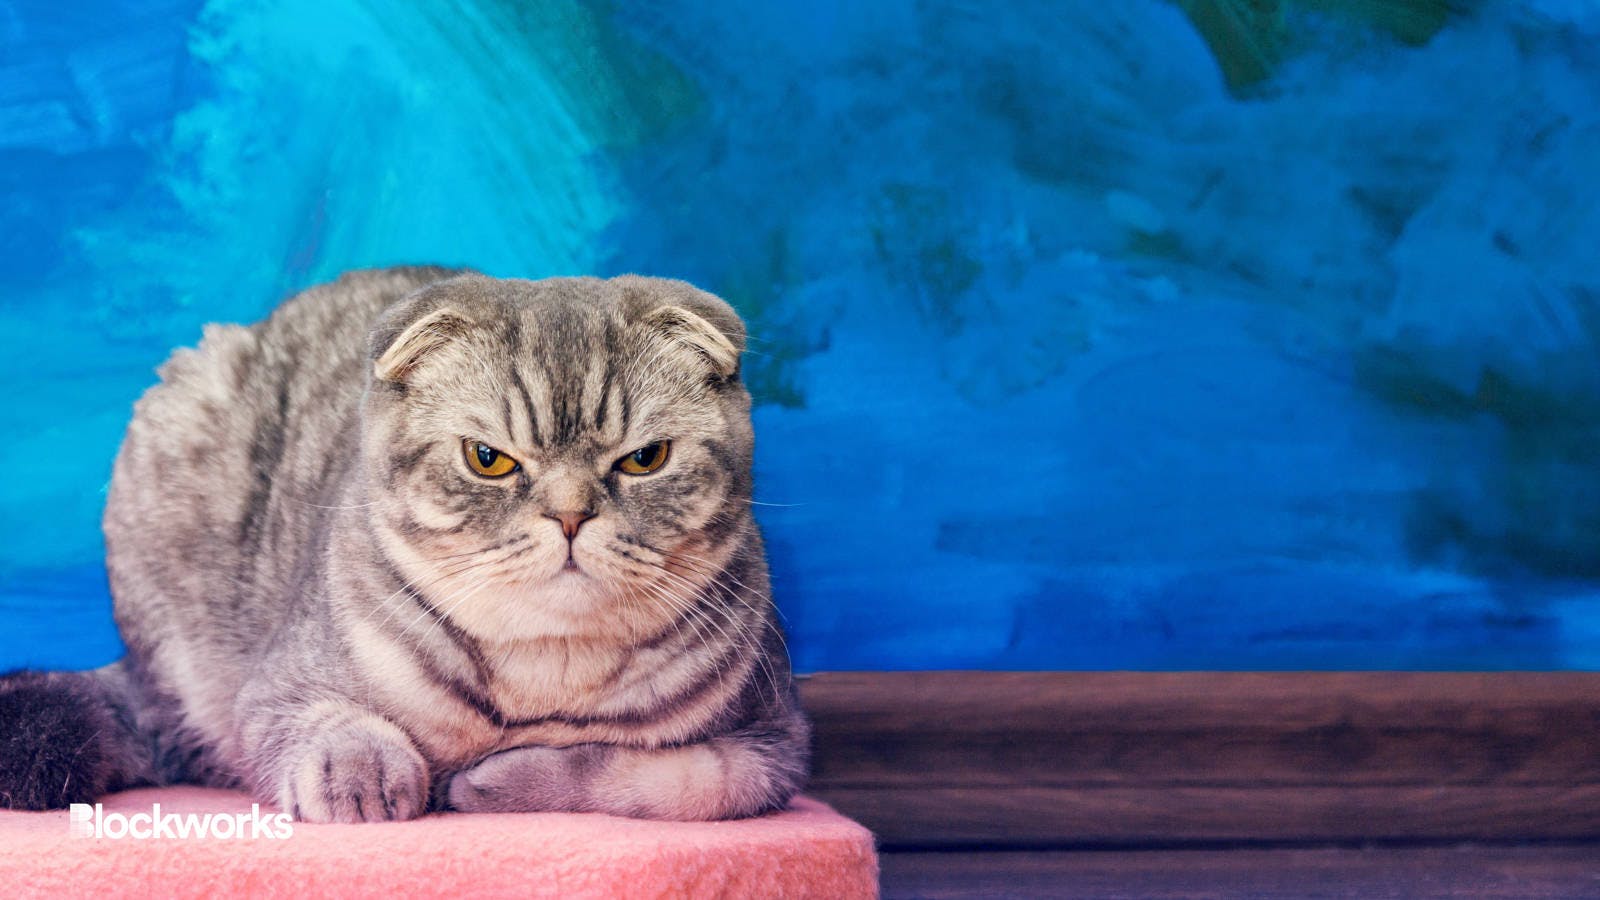 “Grumpy Cat” Creator Sends Cease-and-Desist NFT to Memecoin Issuer